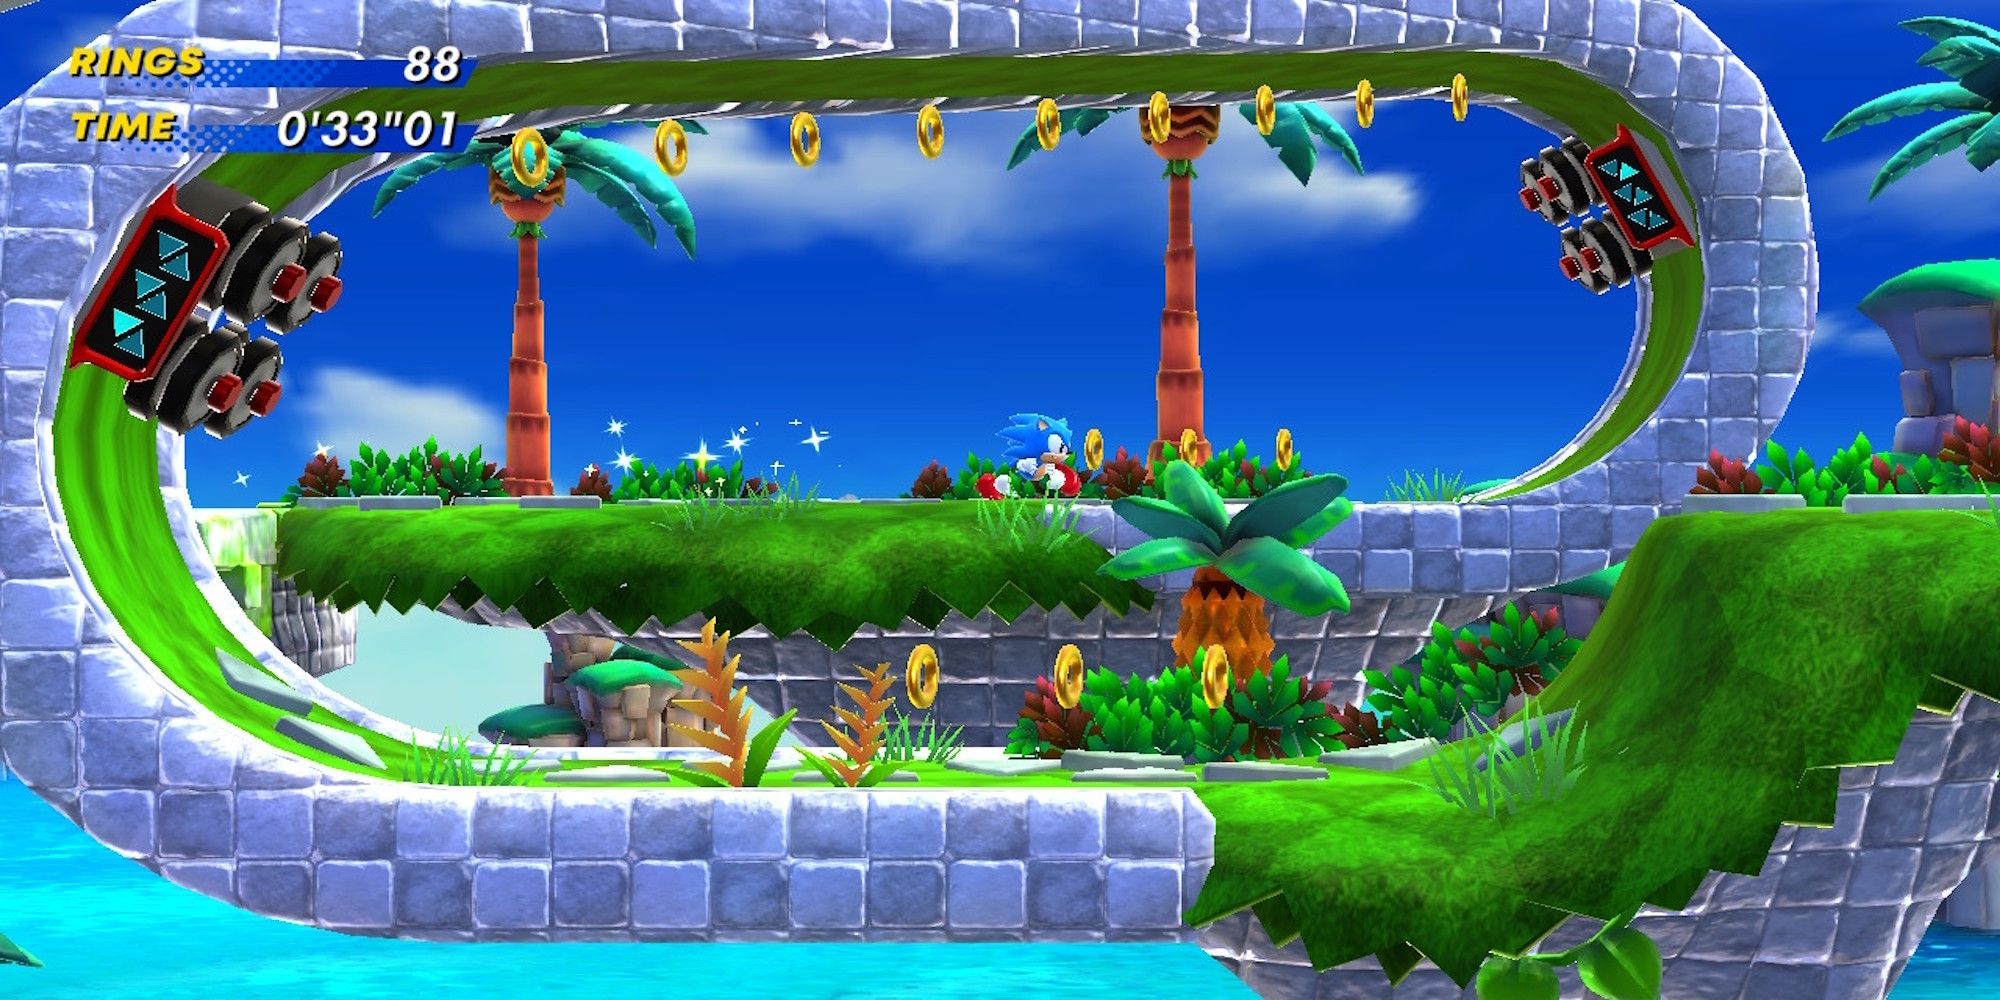 Playing a level in the Bridge Island Zone in Sonic Superstars